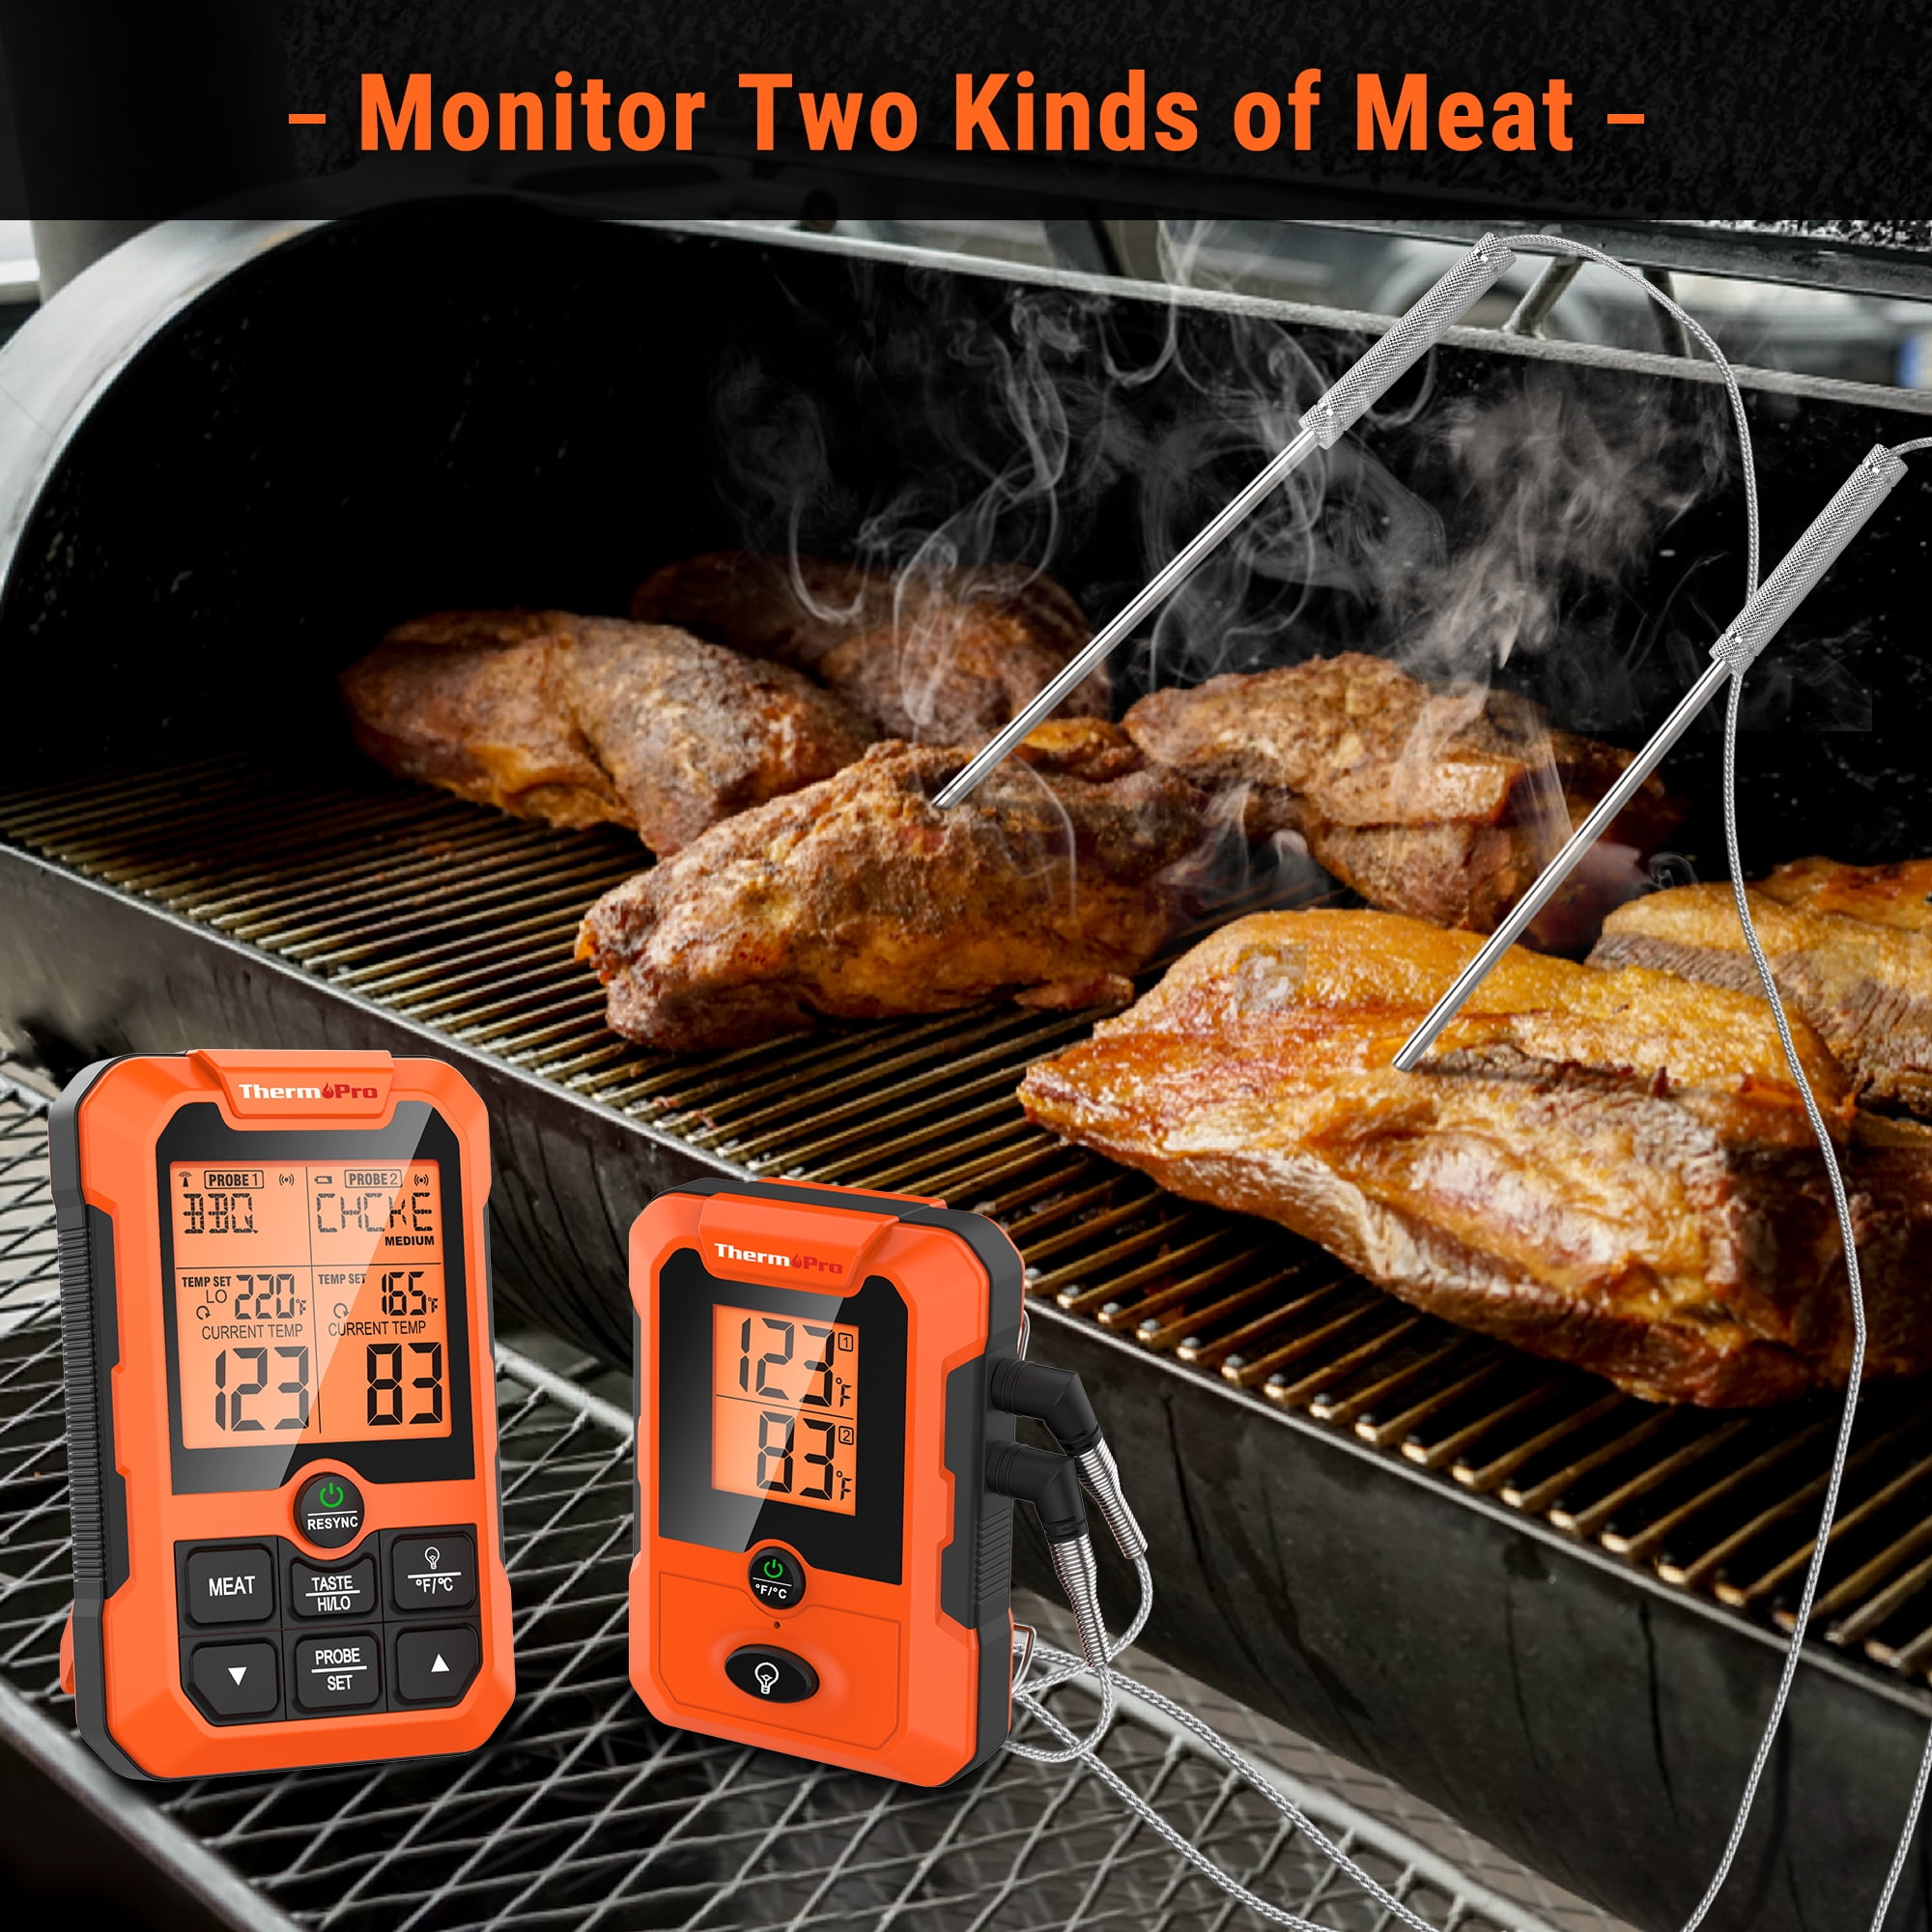 ThermoPro TP810W Wireless Meat Thermometer of 500FT, Dual Probe Meat  Thermometer for Smoker Oven, Grill Thermometer with Dual Probes, Smart  Rechargeable BBQ Thermometer for Cooking Turkey Fish Beef